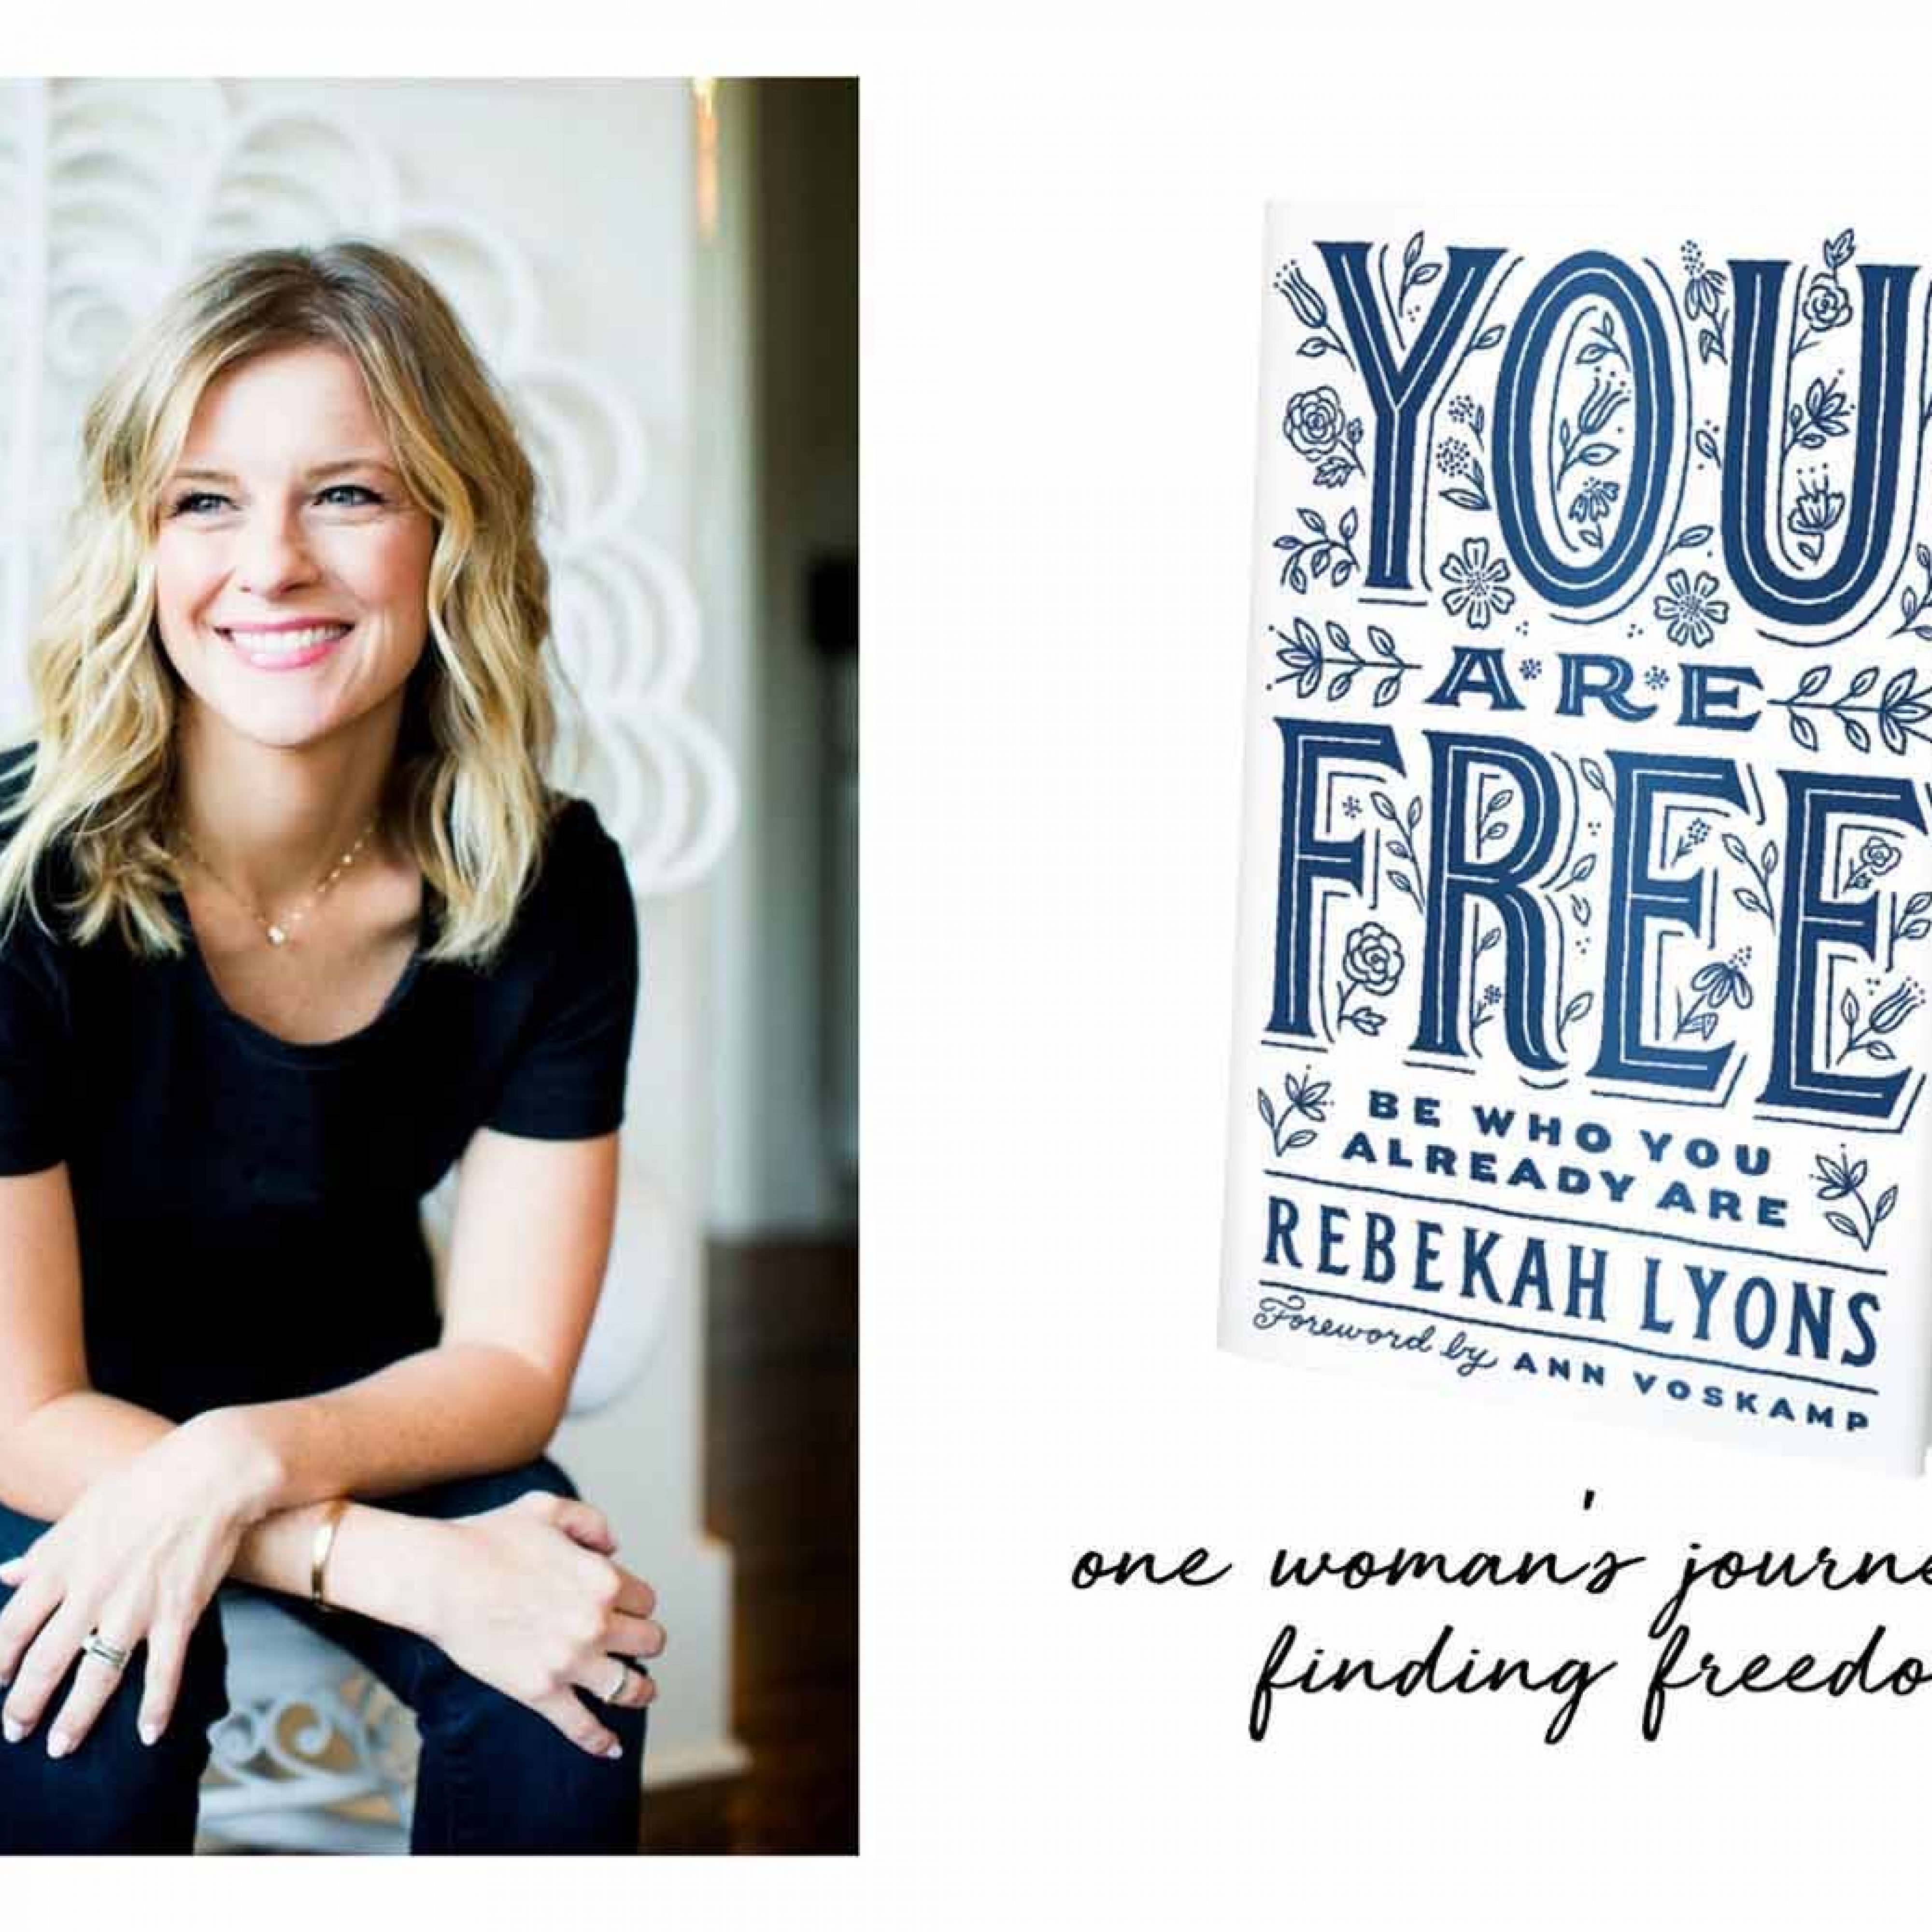 One Woman's Journey Why Rebekah Lyons Wrote You Are Free